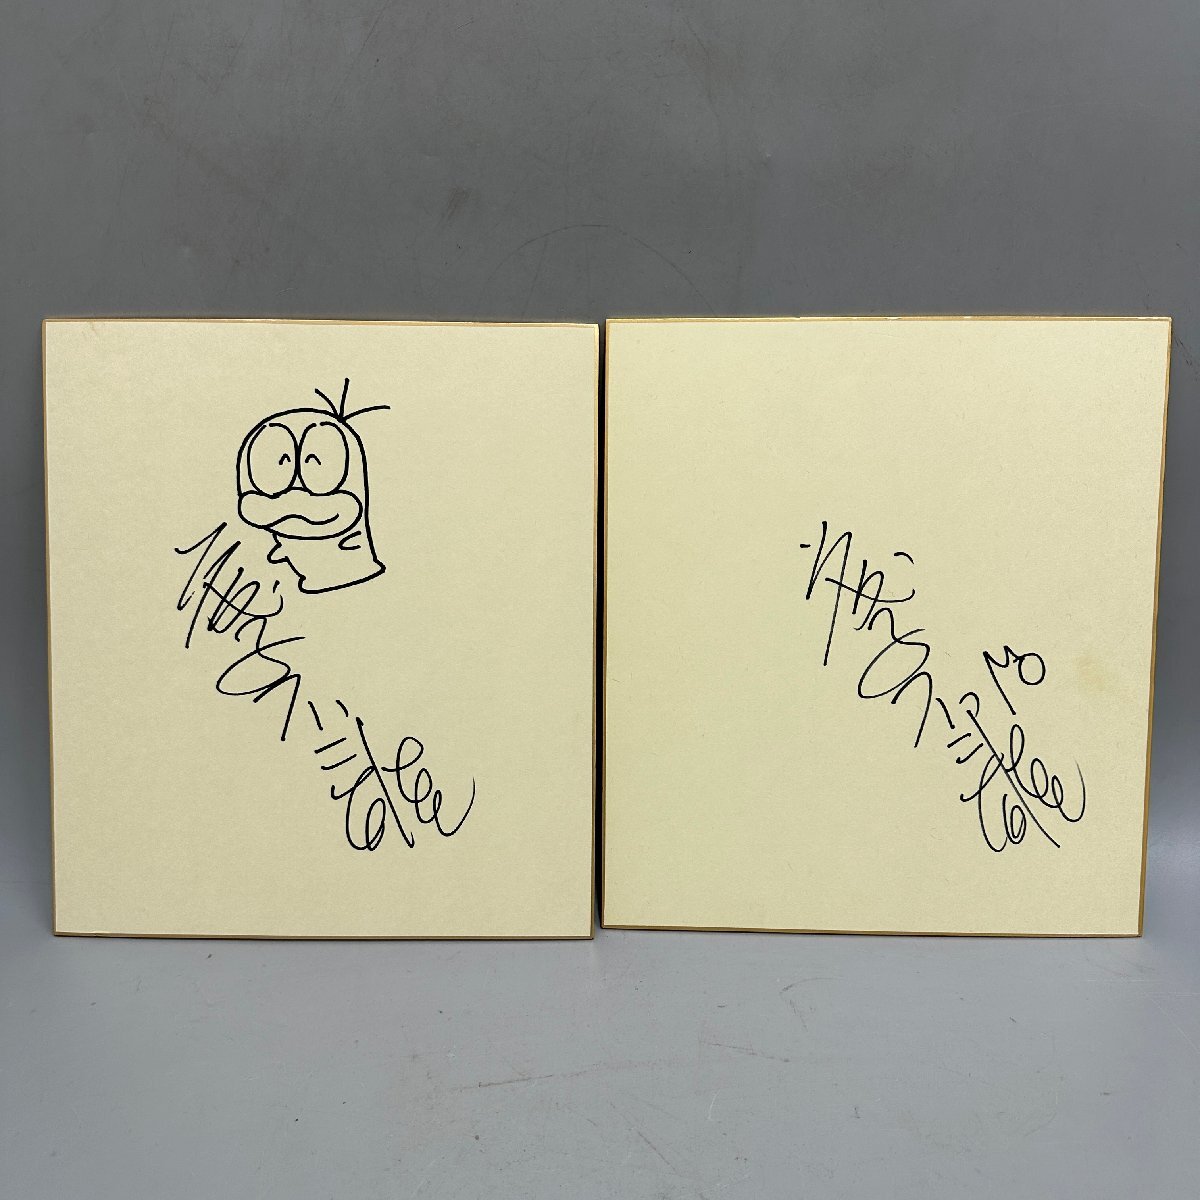 ●○[4] Fujiko Fujio autograph colored paper autograph 2 points Ghost Q Taro 06/040204s○●, comics, anime goods, sign, Hand-drawn painting